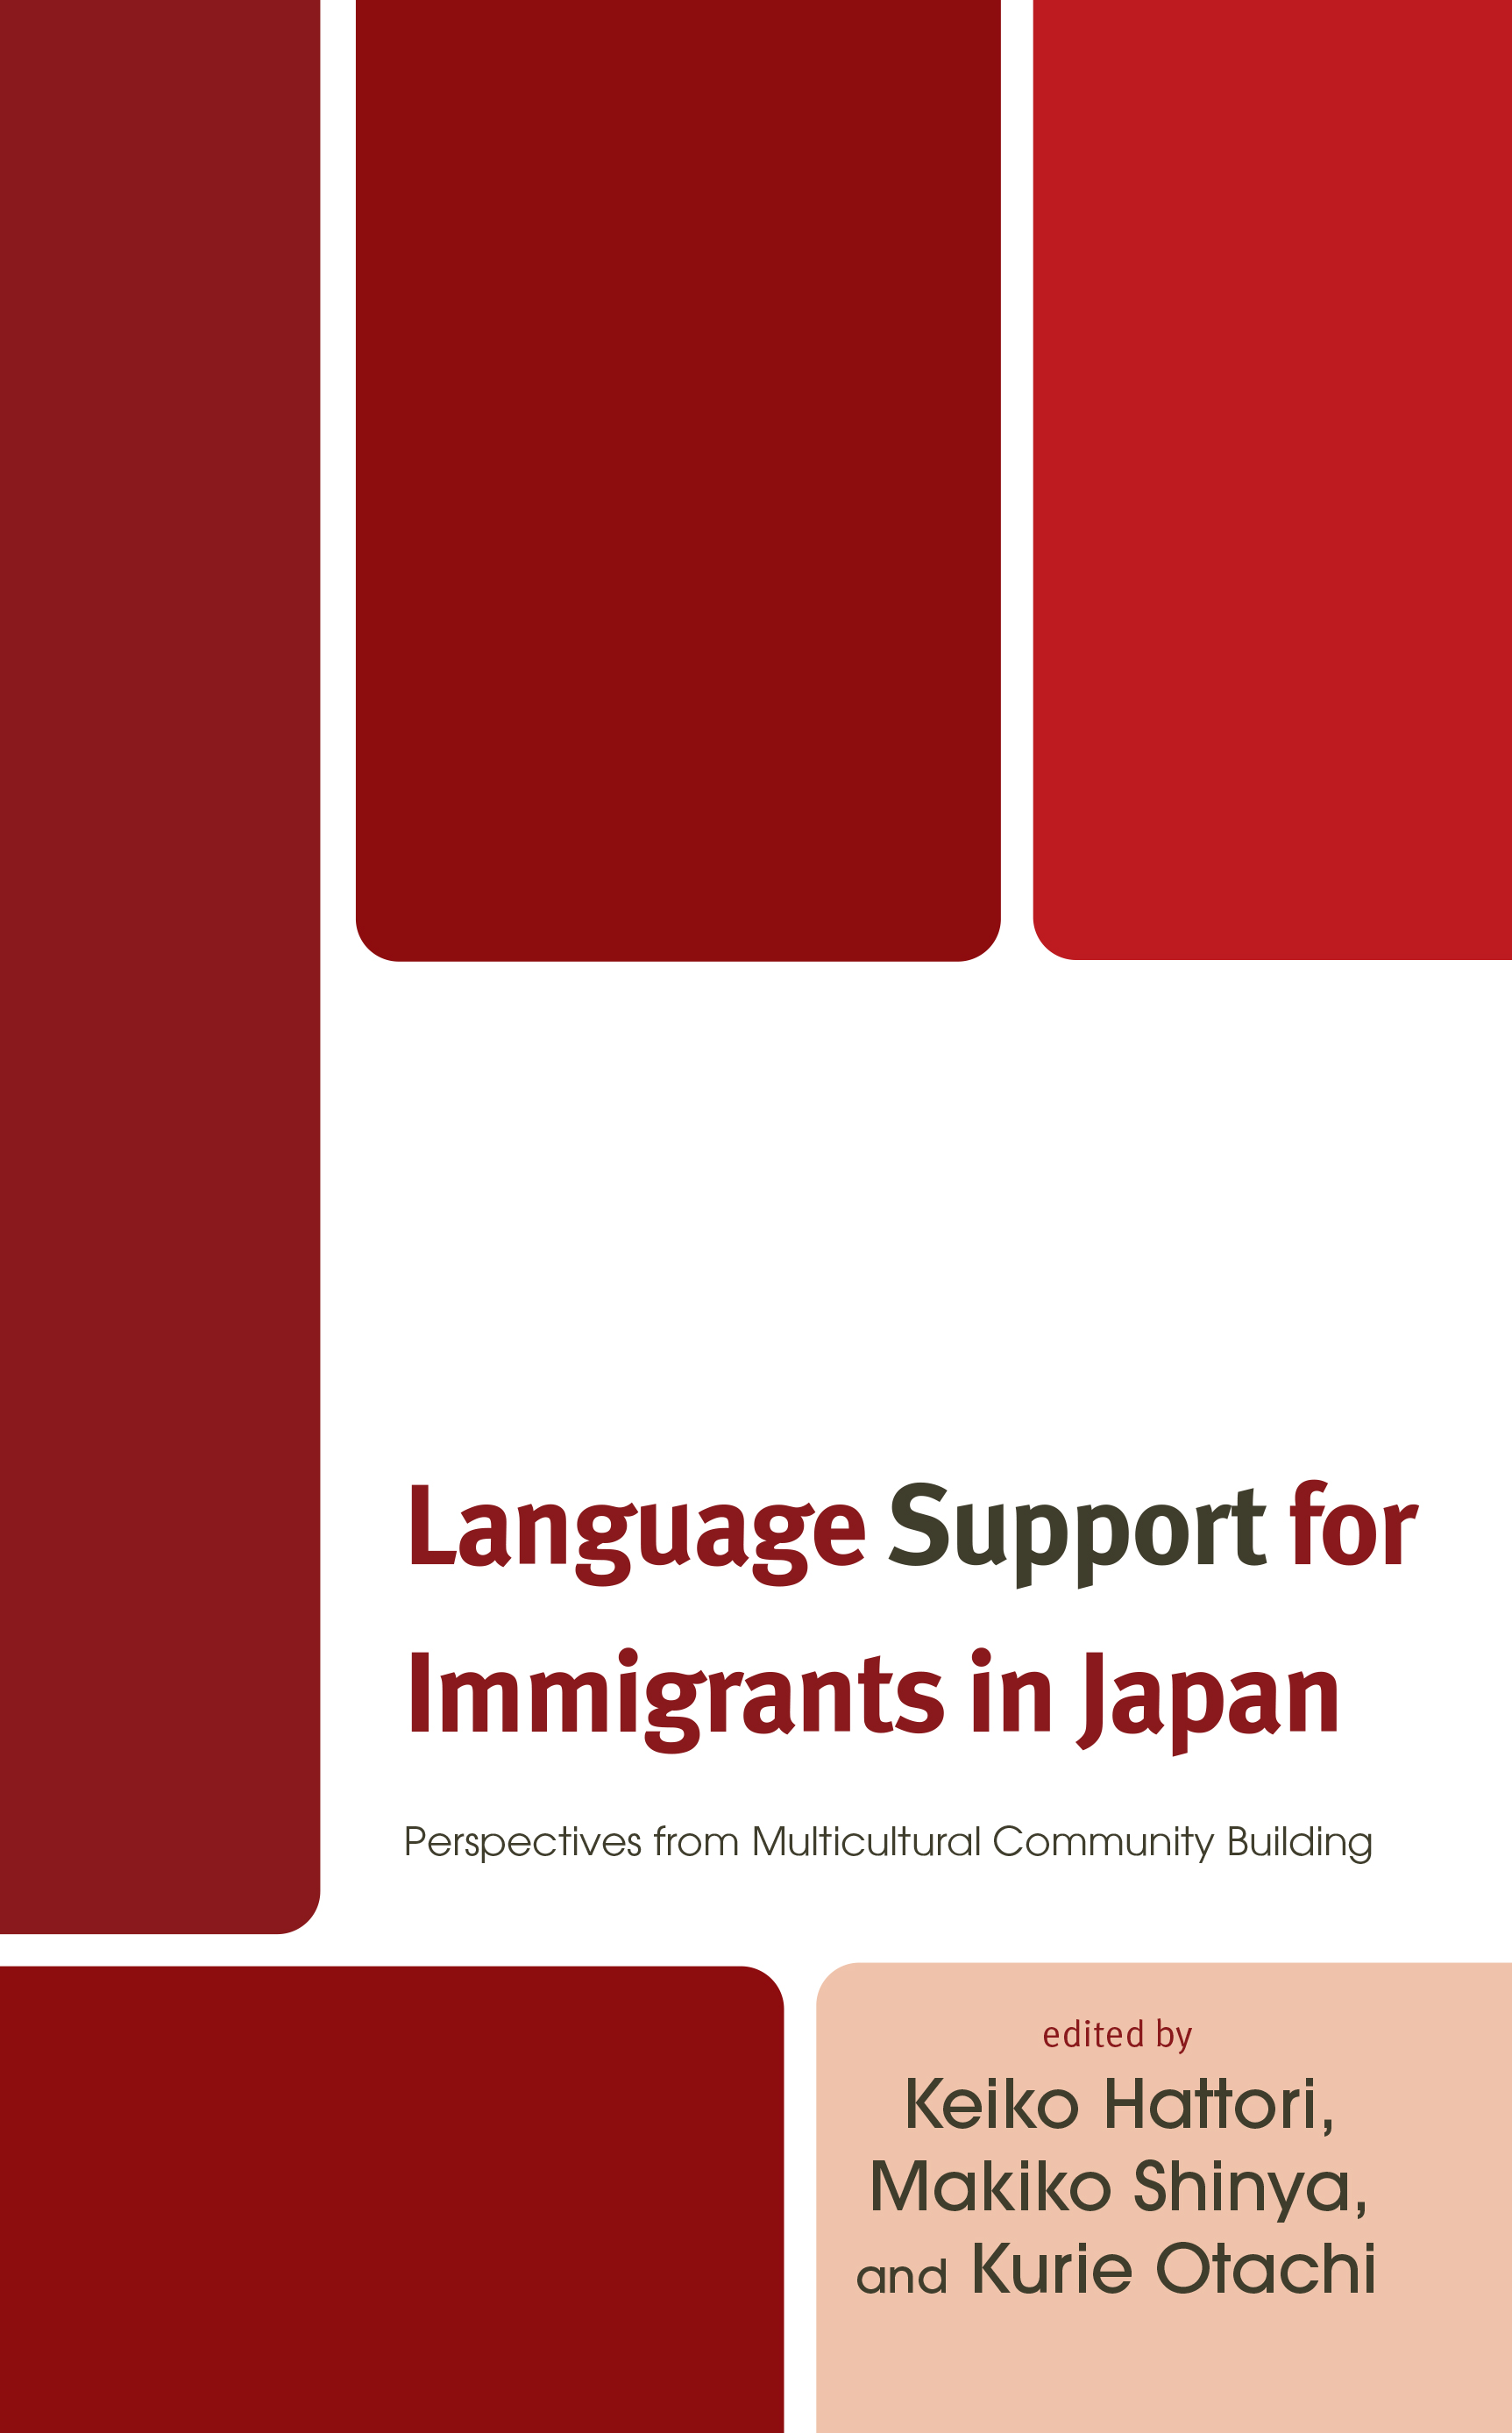 Language Support for Immigrants in Japan: Perspectives from Multicultural Community Building